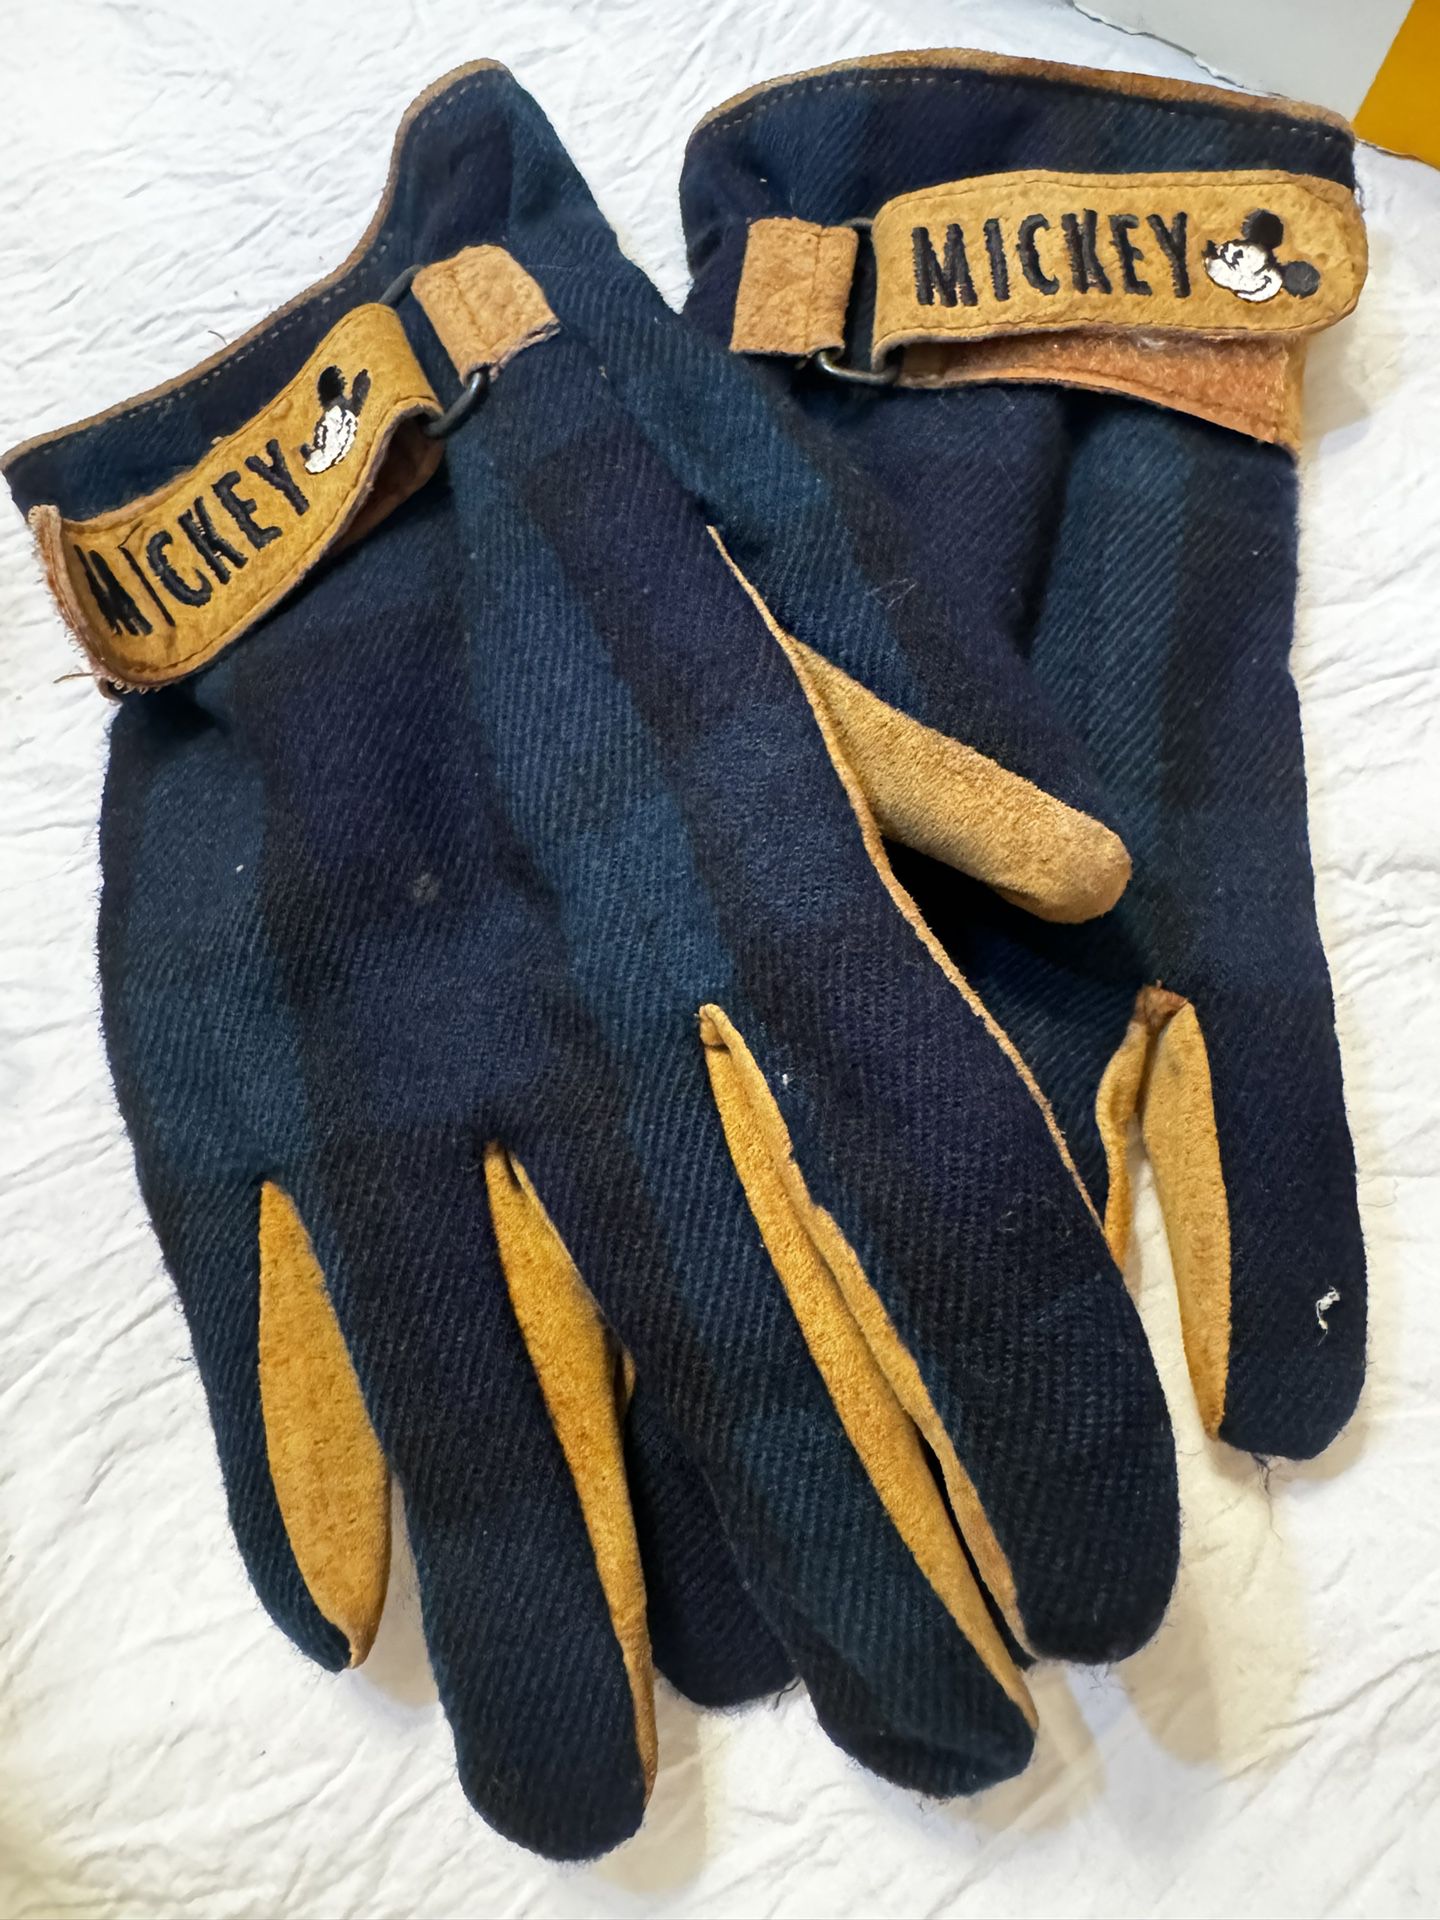 Disney Store Vintage Mickey Mouse Work Gloves